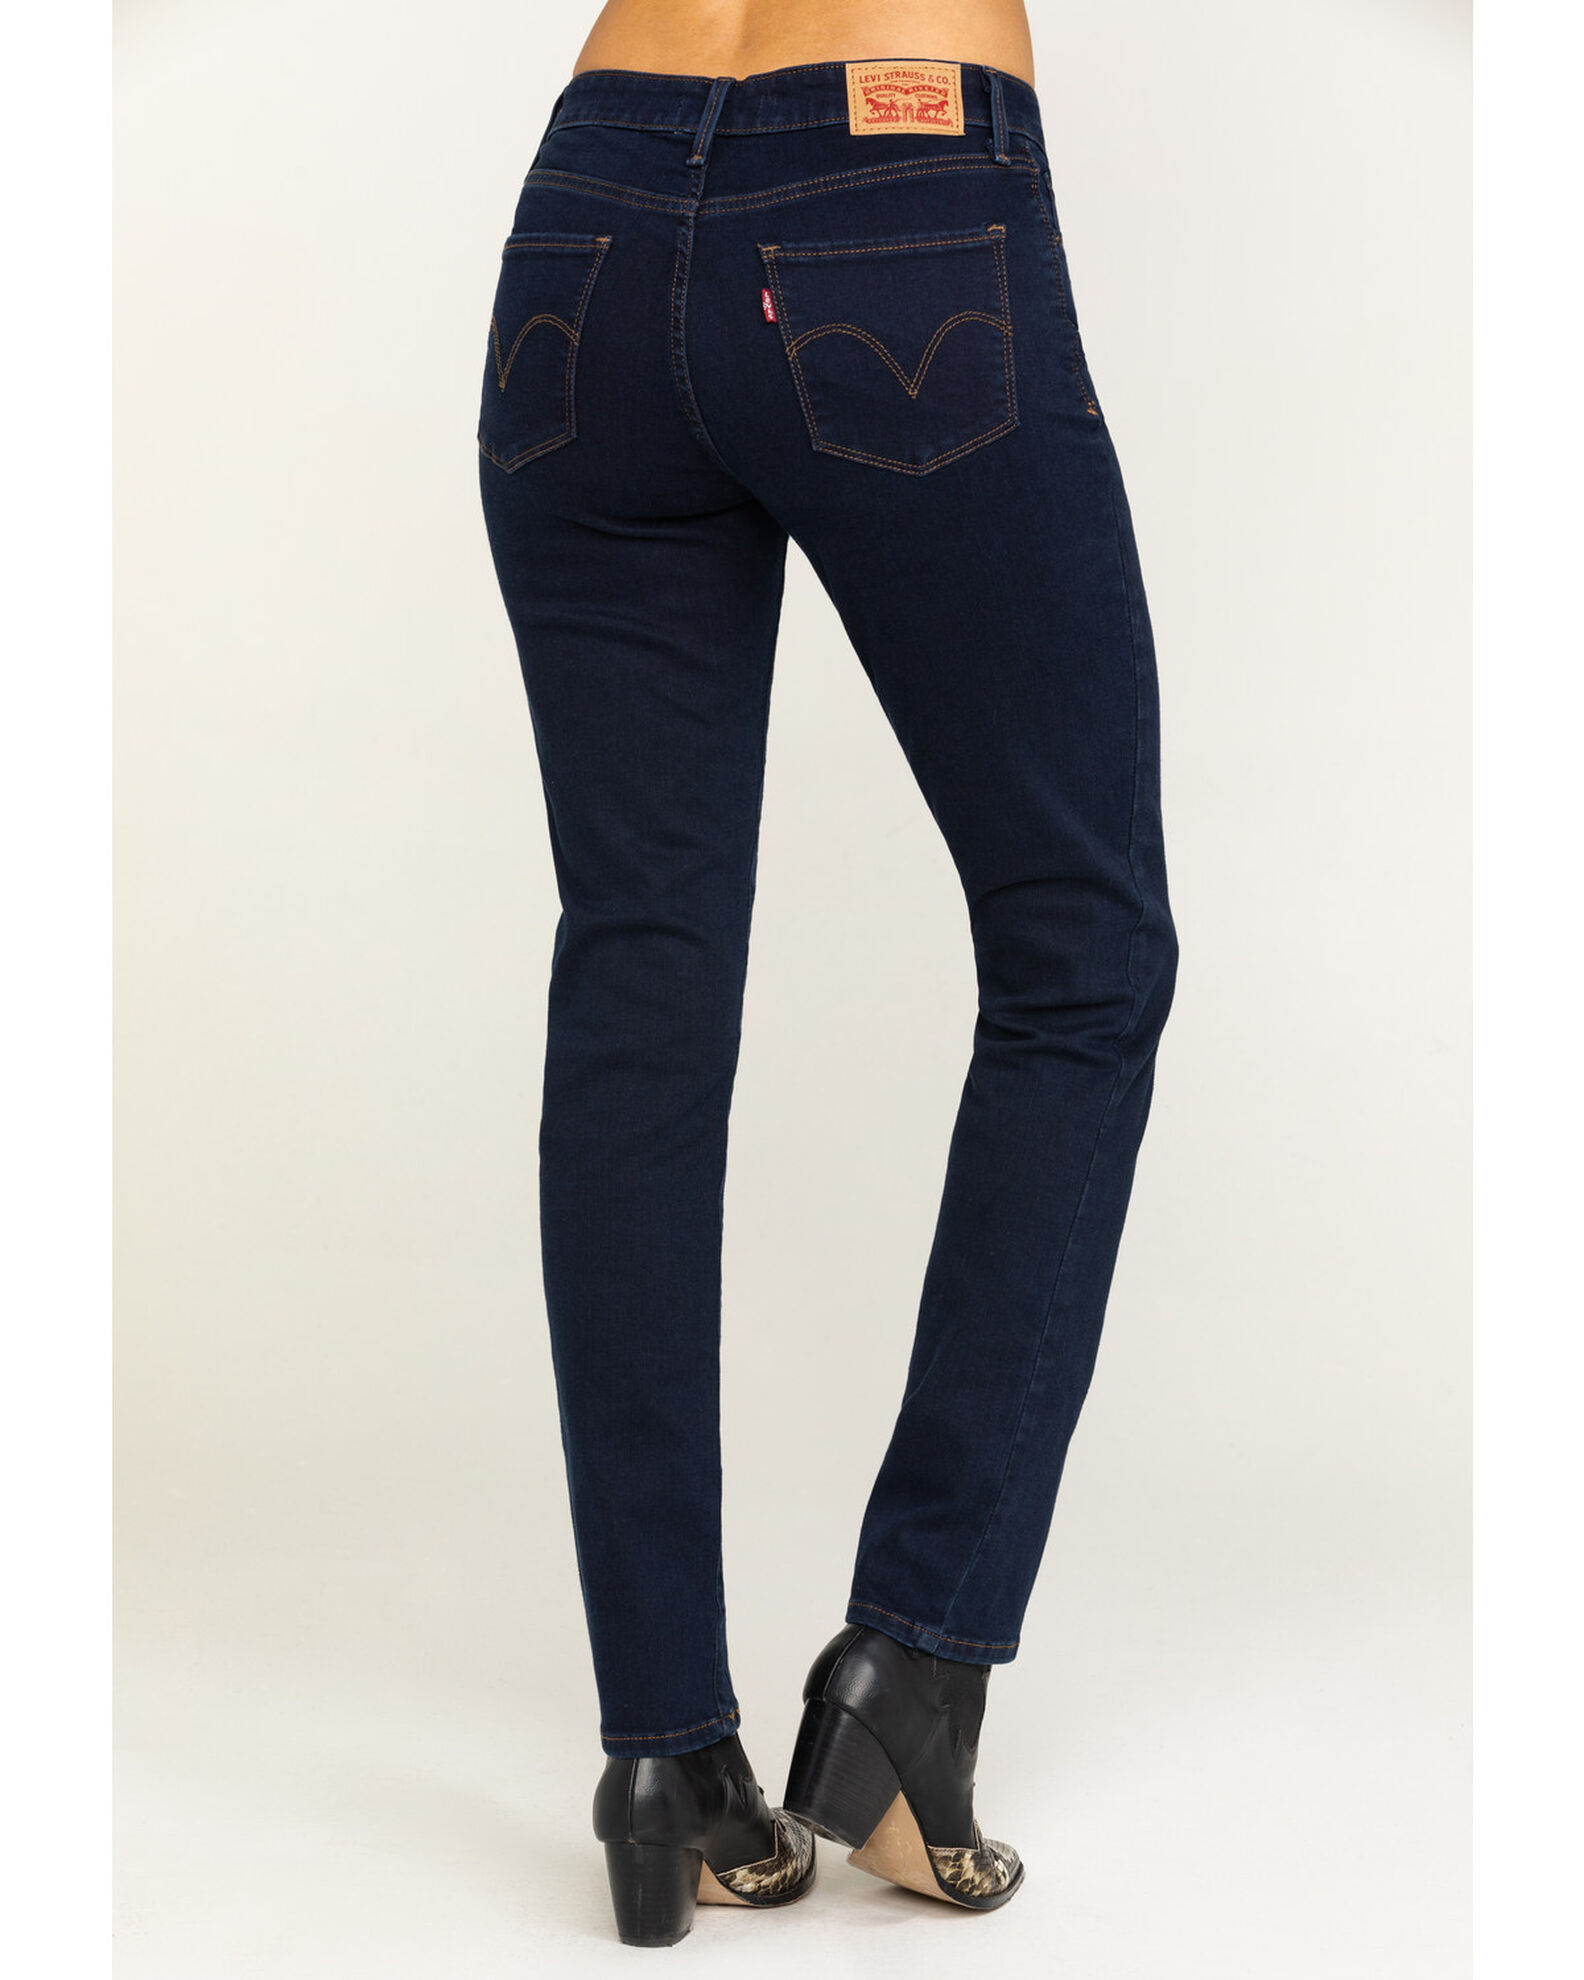 Levi's Mid Rise Skinny Jeans | Boot Barn